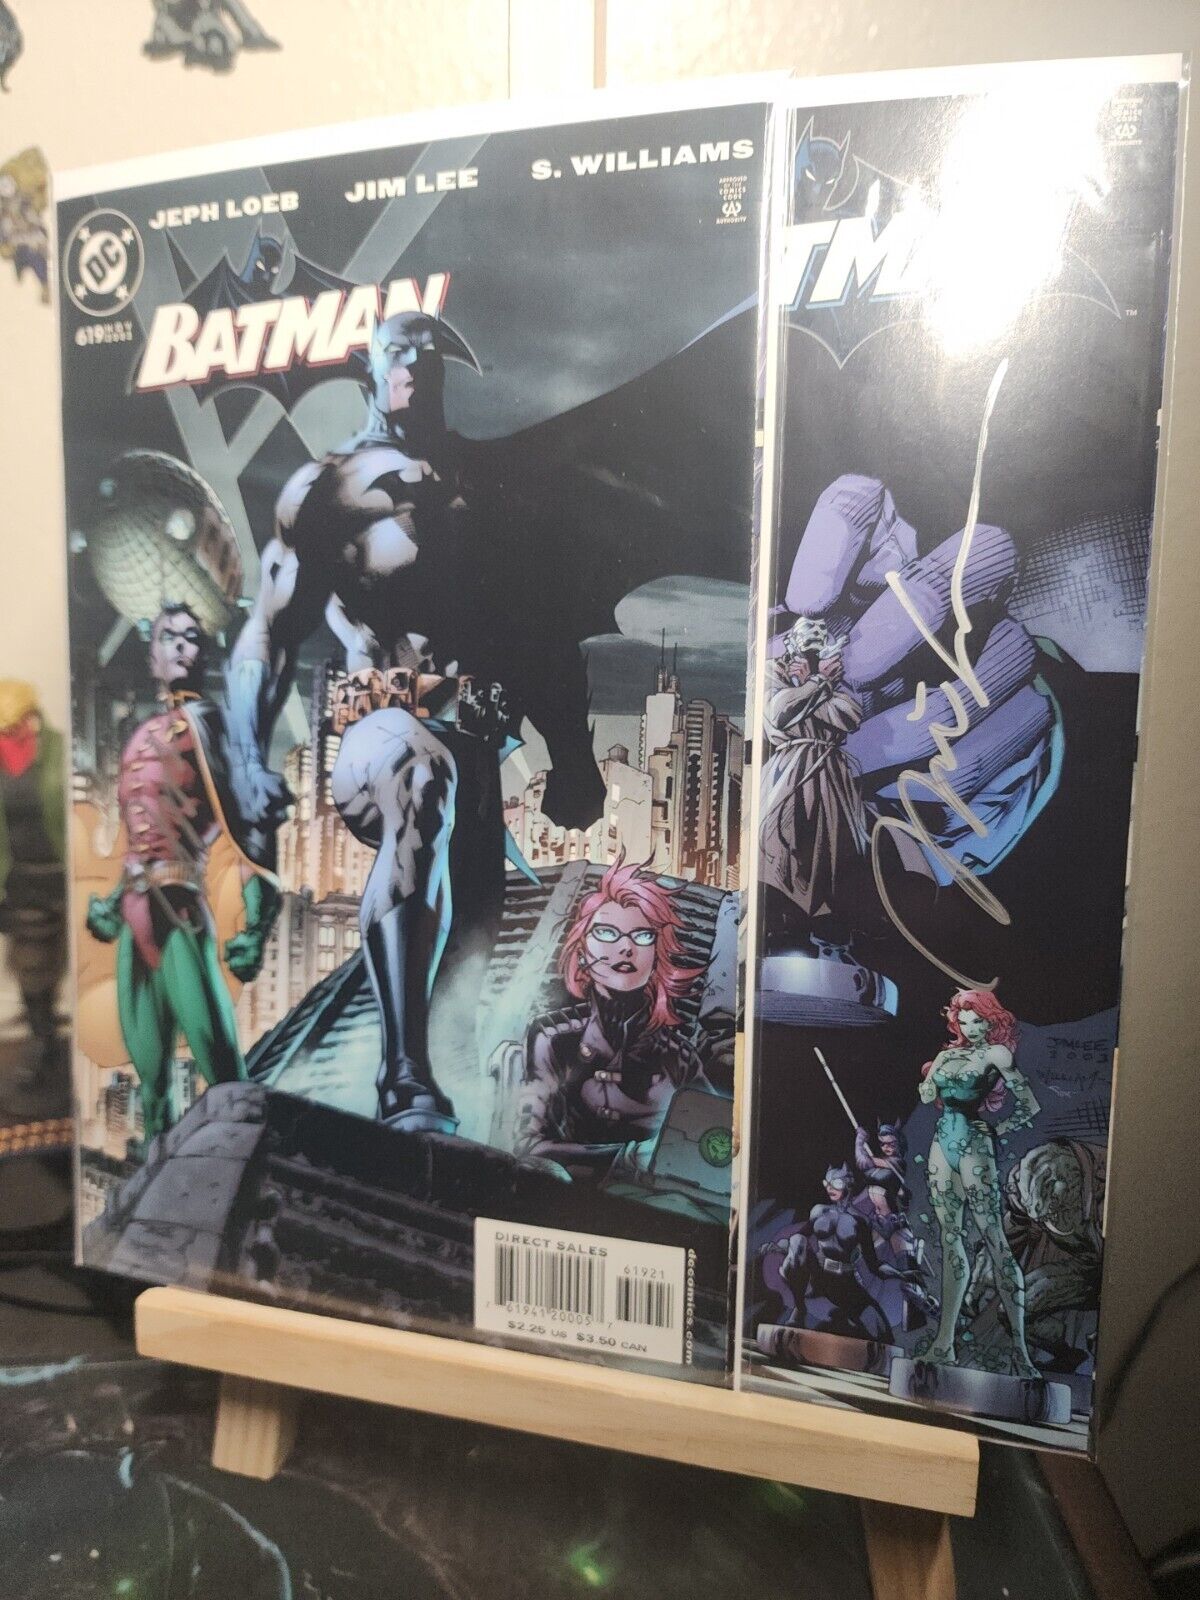 Batman 619 + 619 Second Printing Both Signed By Jim Lee.